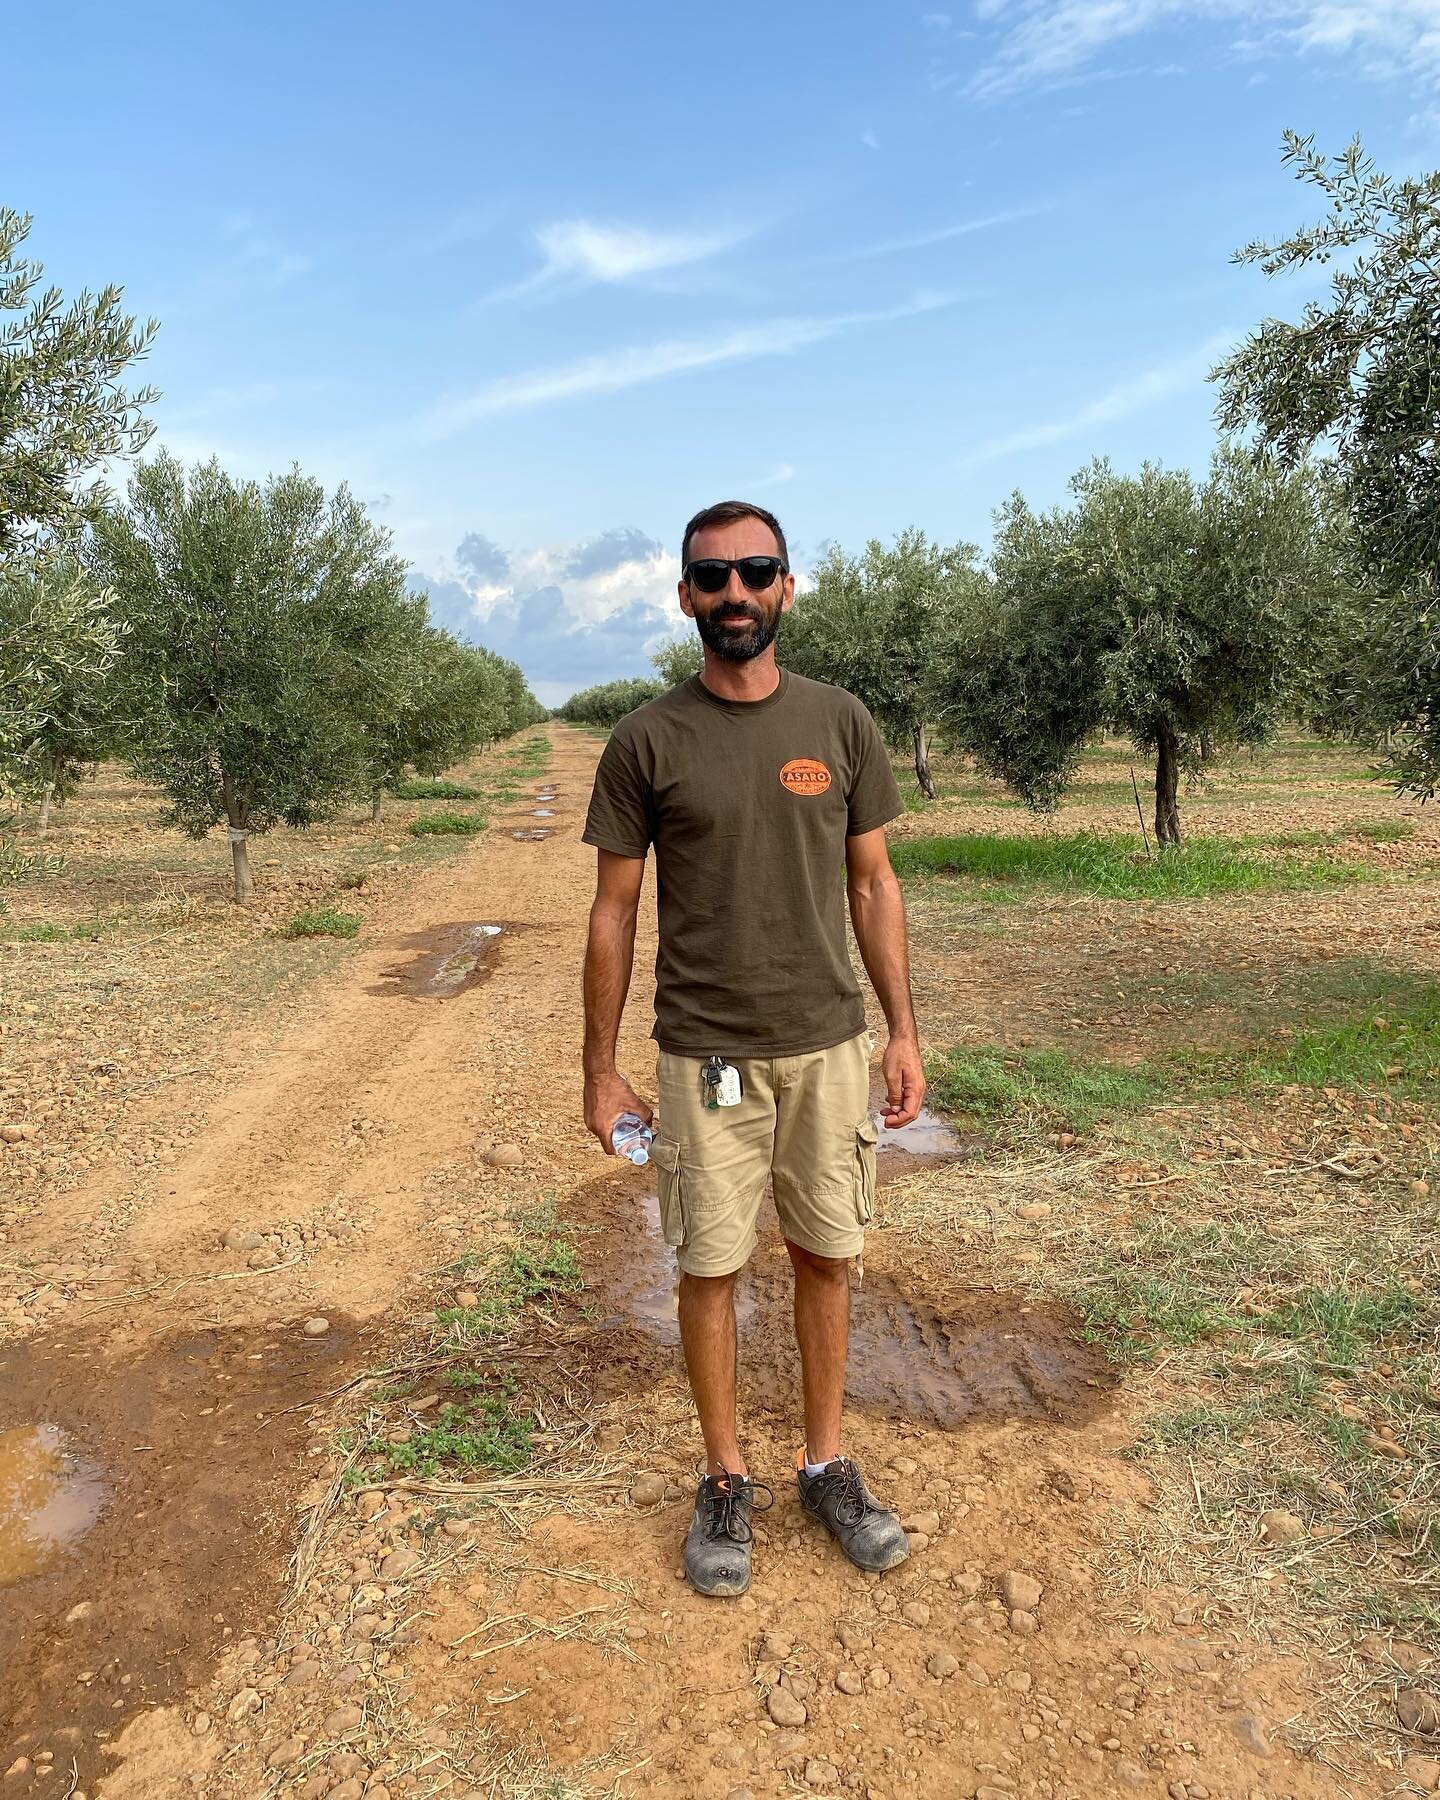 This is Nico. He is one of three people who watches over the 15,000 olive trees at the farm. Nico doesn&rsquo;t want to travel the property by tractor or bike because he says it&rsquo;s not efficient. So he walks, on average, 100 kilometers a month o